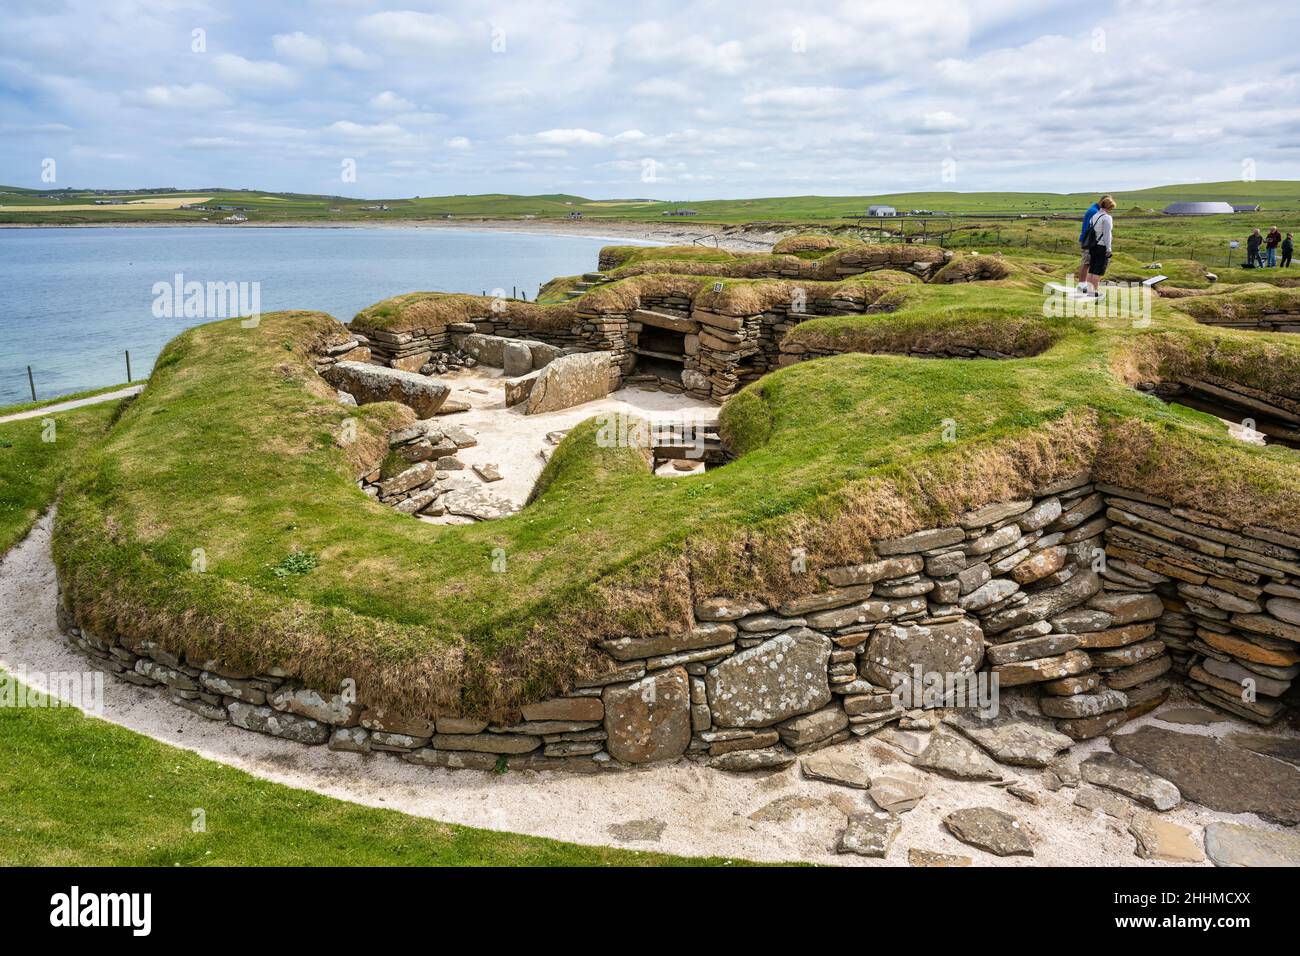 Neolithic settlement of Skara Brae next to Bay of Skaill near Sandwick on Mainland Orkney in Scotland Stock Photo